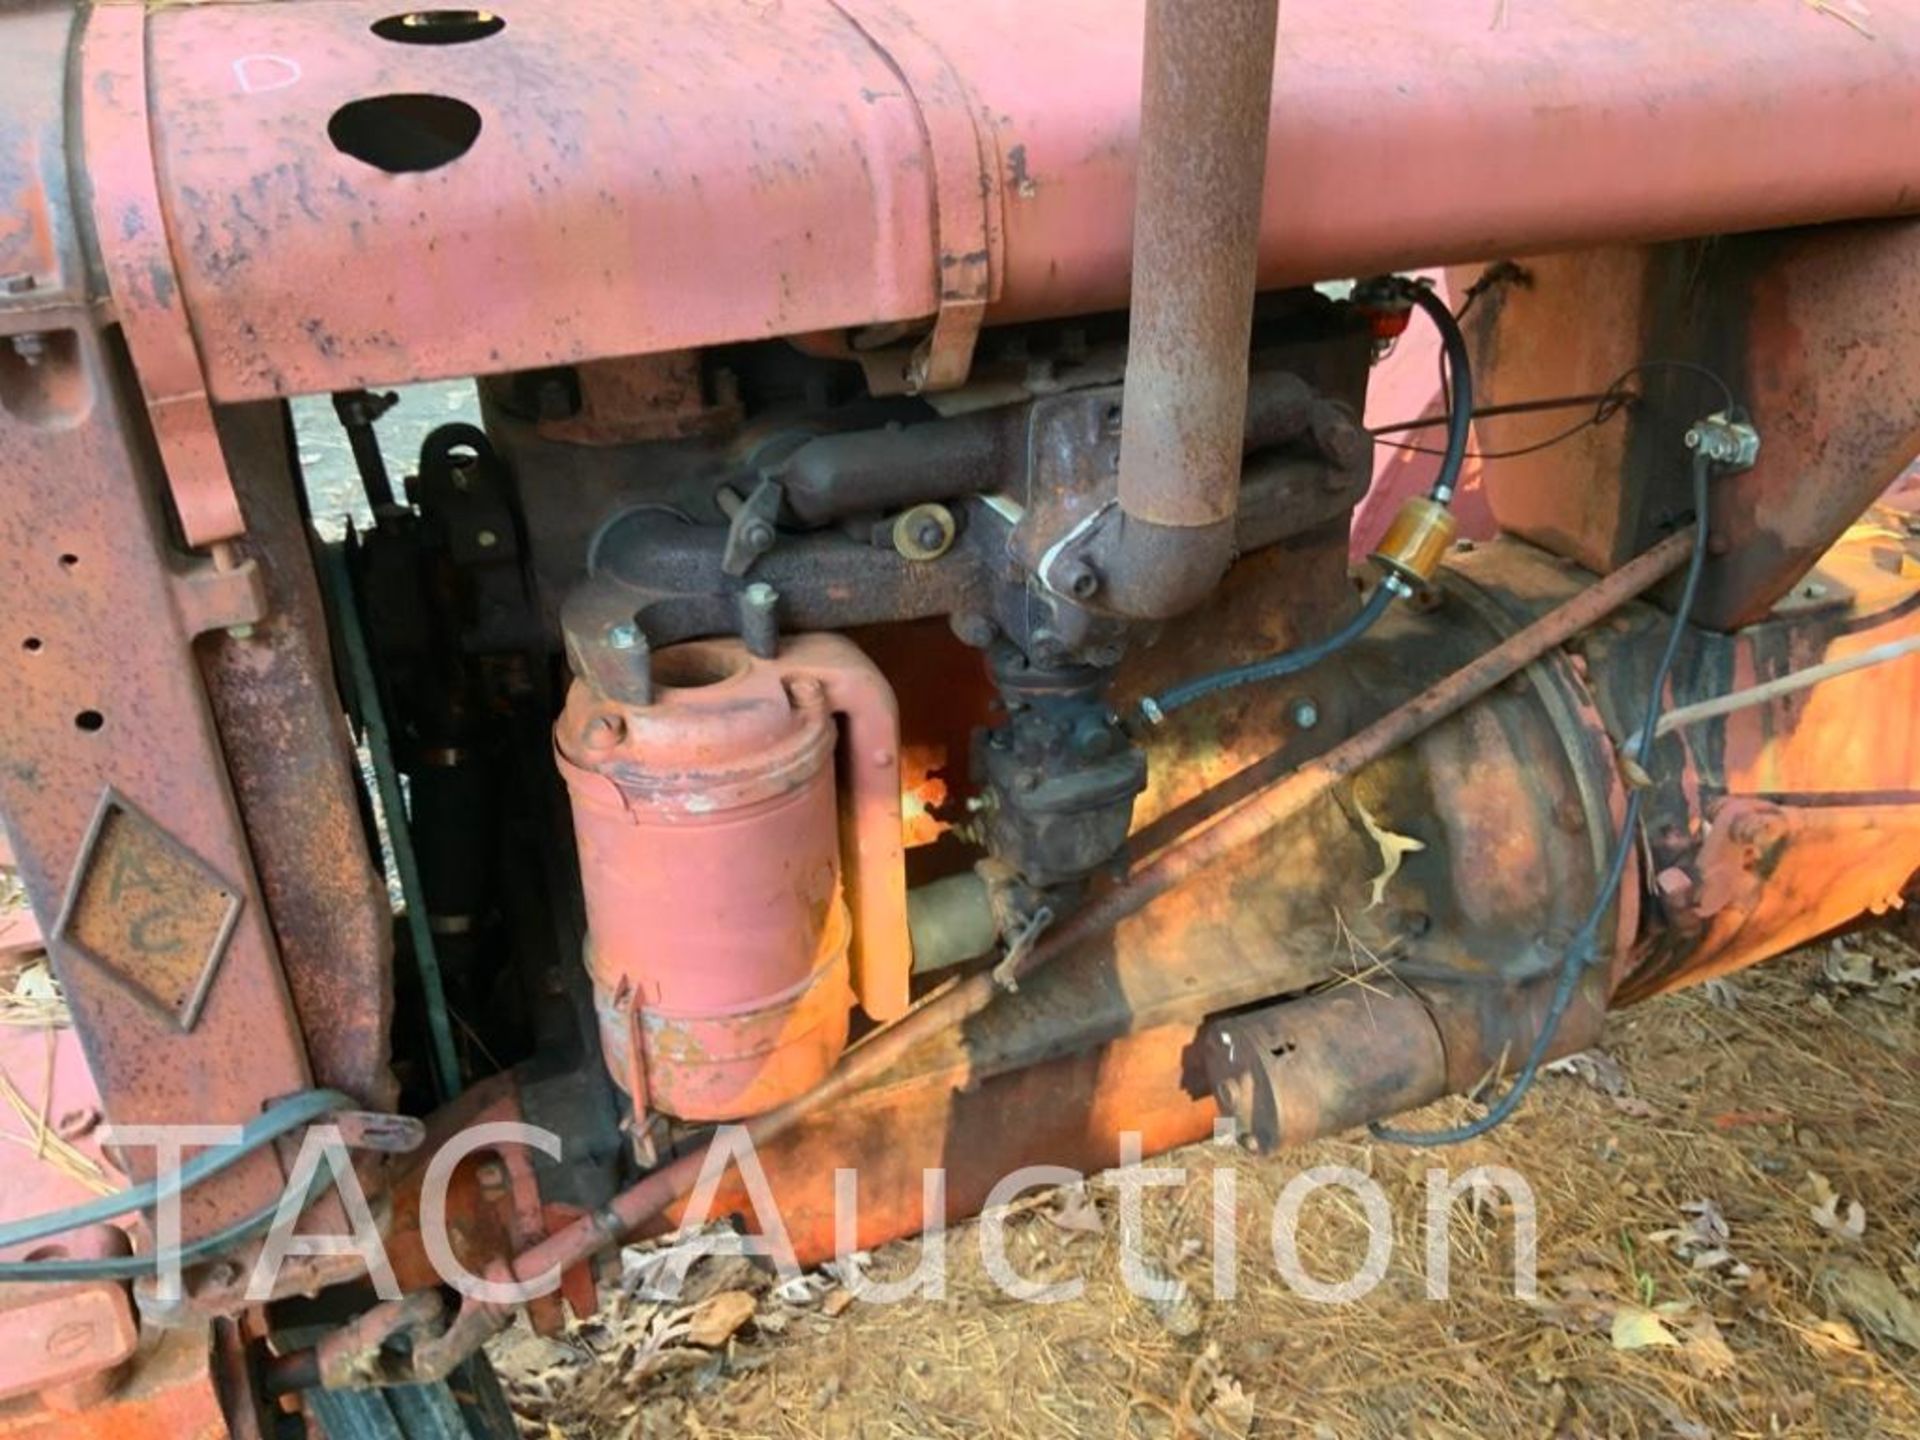 Allis Chalmers Tri Cycle Antique Farm Tractor - Image 16 of 16